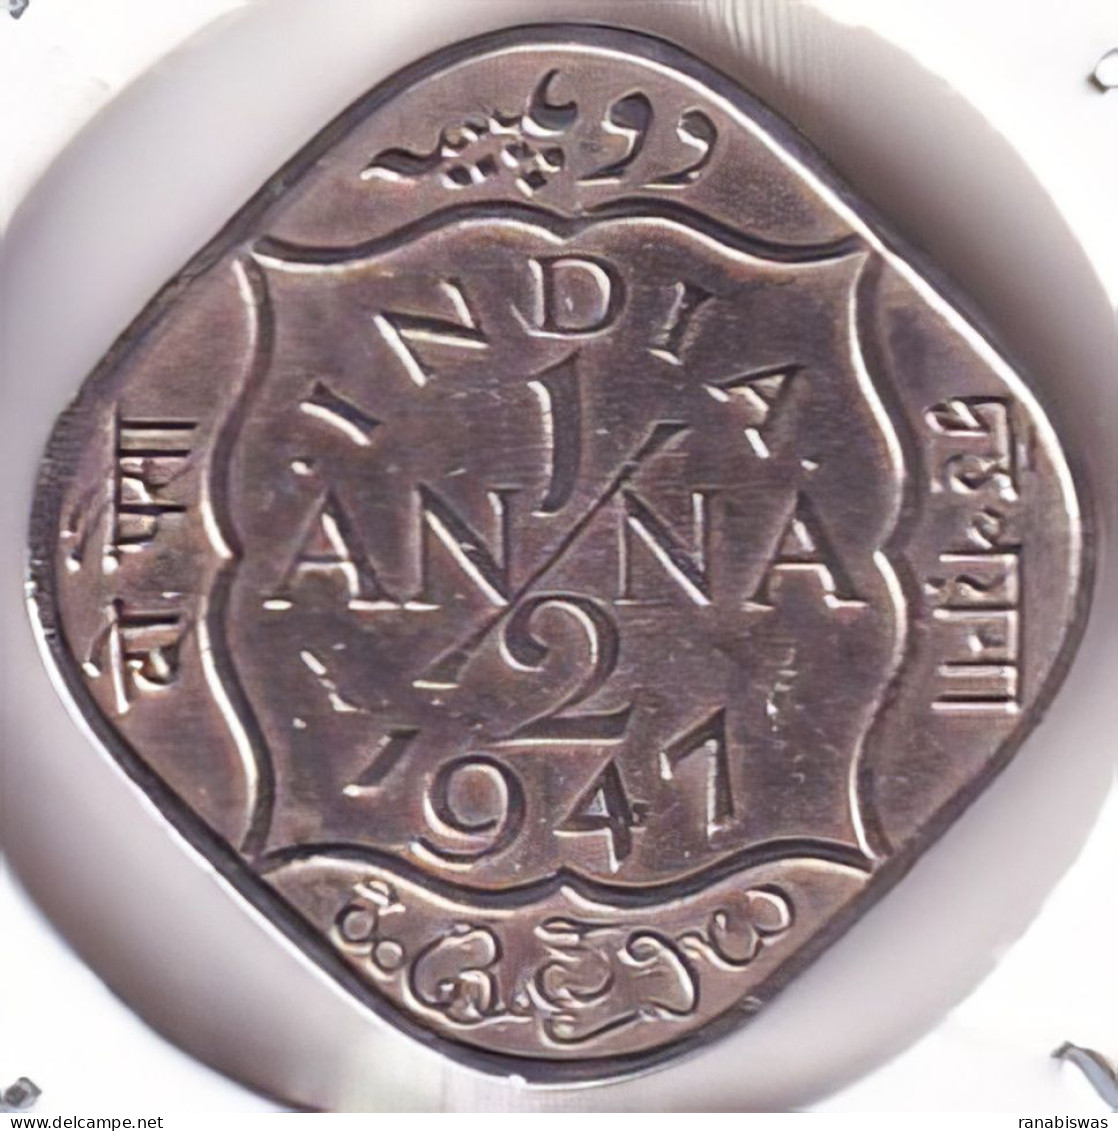 INDIA COIN LOT 170, 1/2 ANNA 1947, BOMBAY MINT, UNC, RARE - Inde